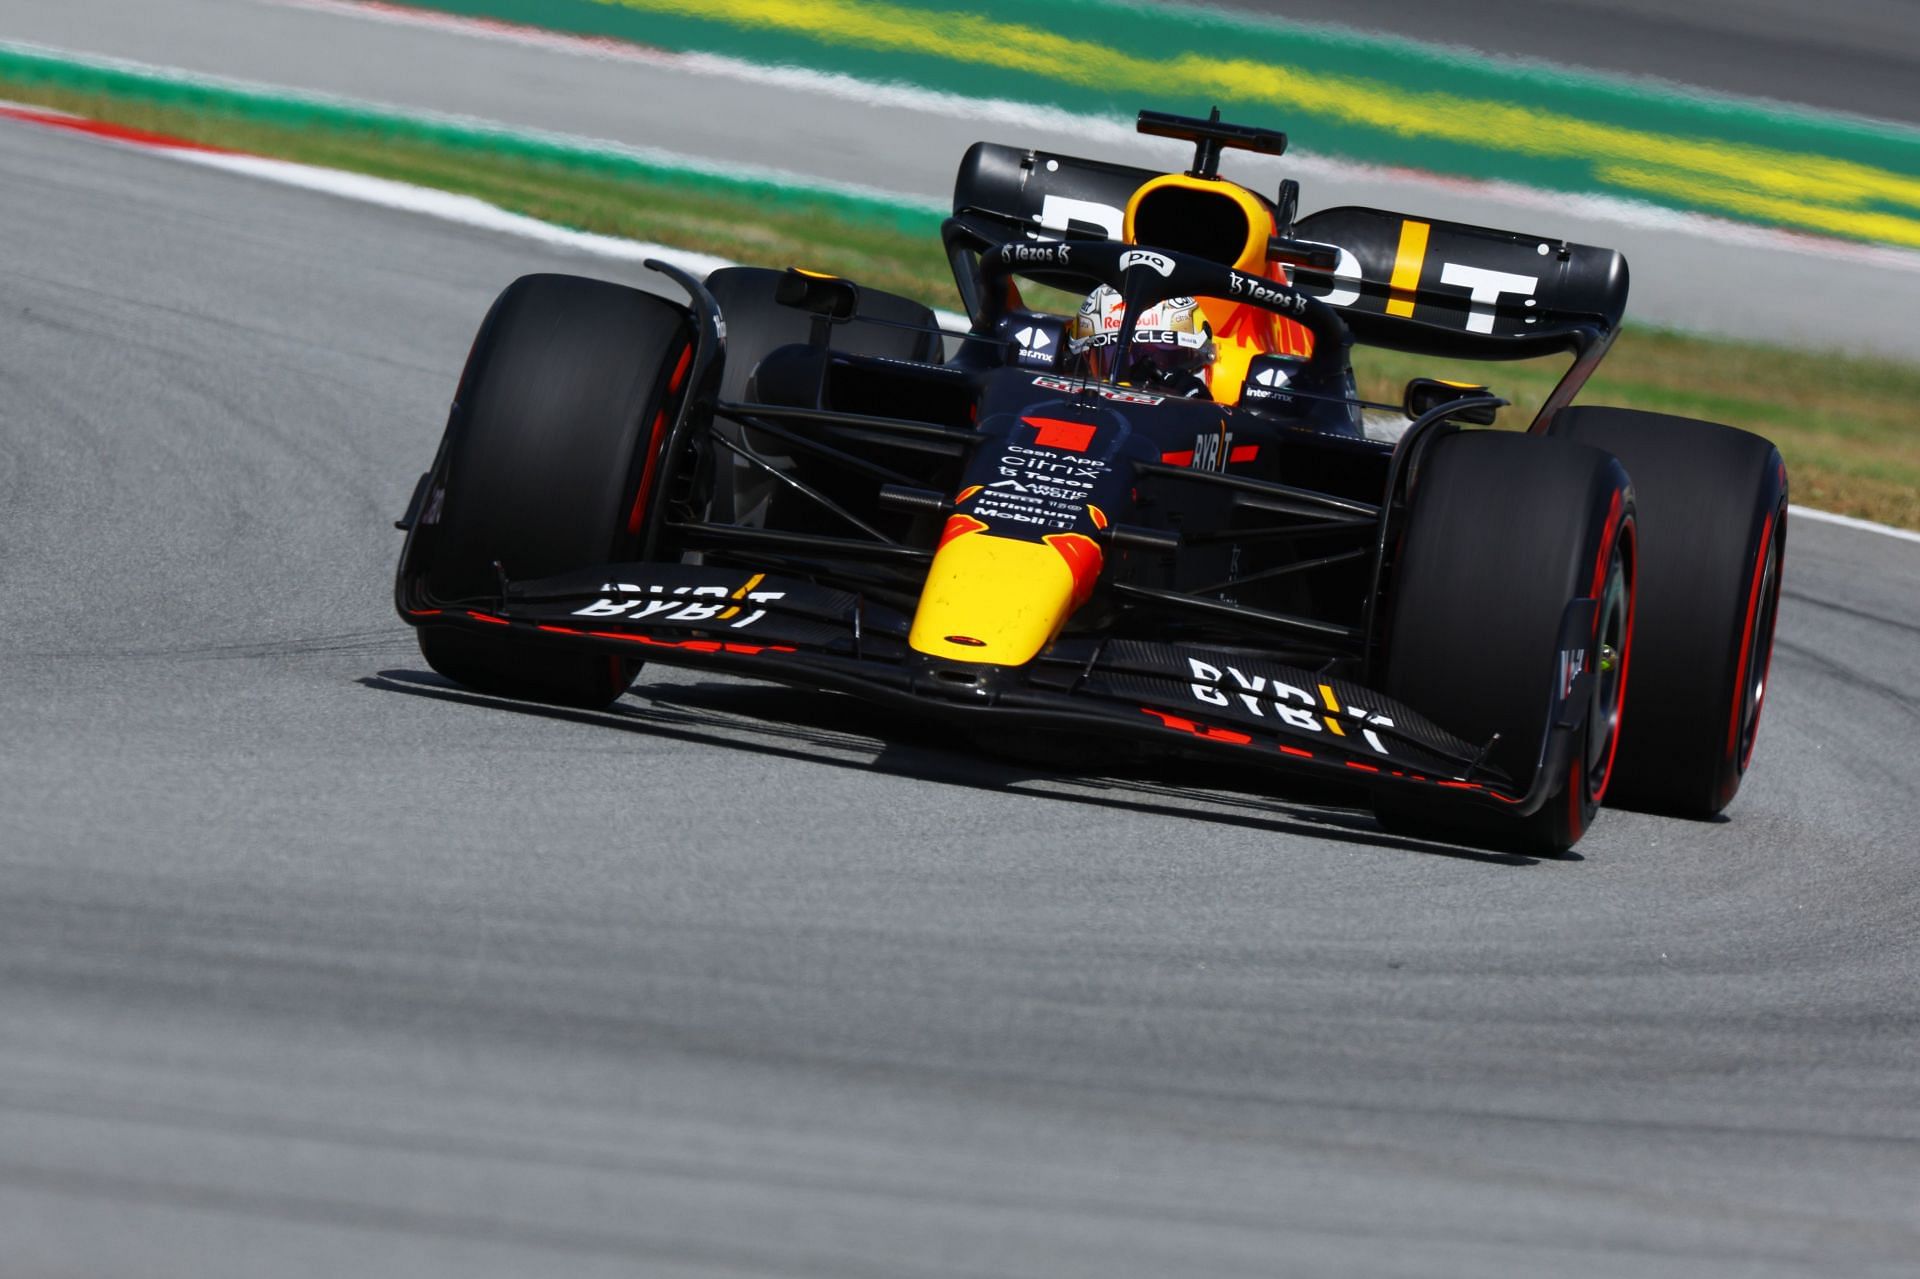 Max Verstappen overcame DRS issues at the 2022 Spanish GP to take his third consecutive victory of the season